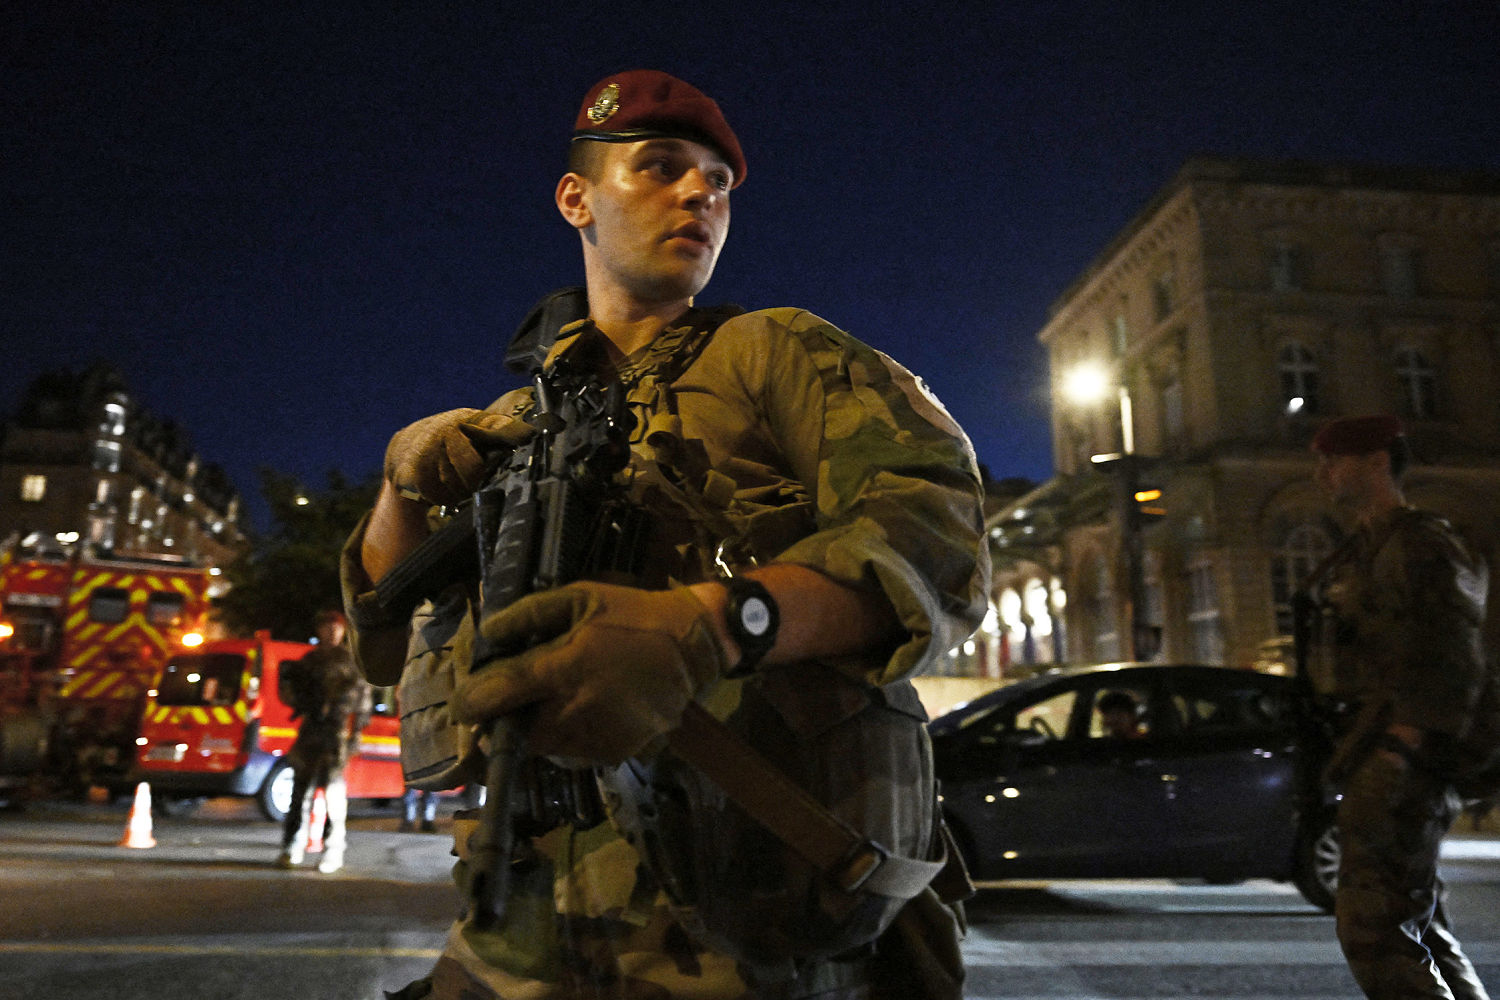 French soldier stabbed on patrol in Paris ahead of Olympics 